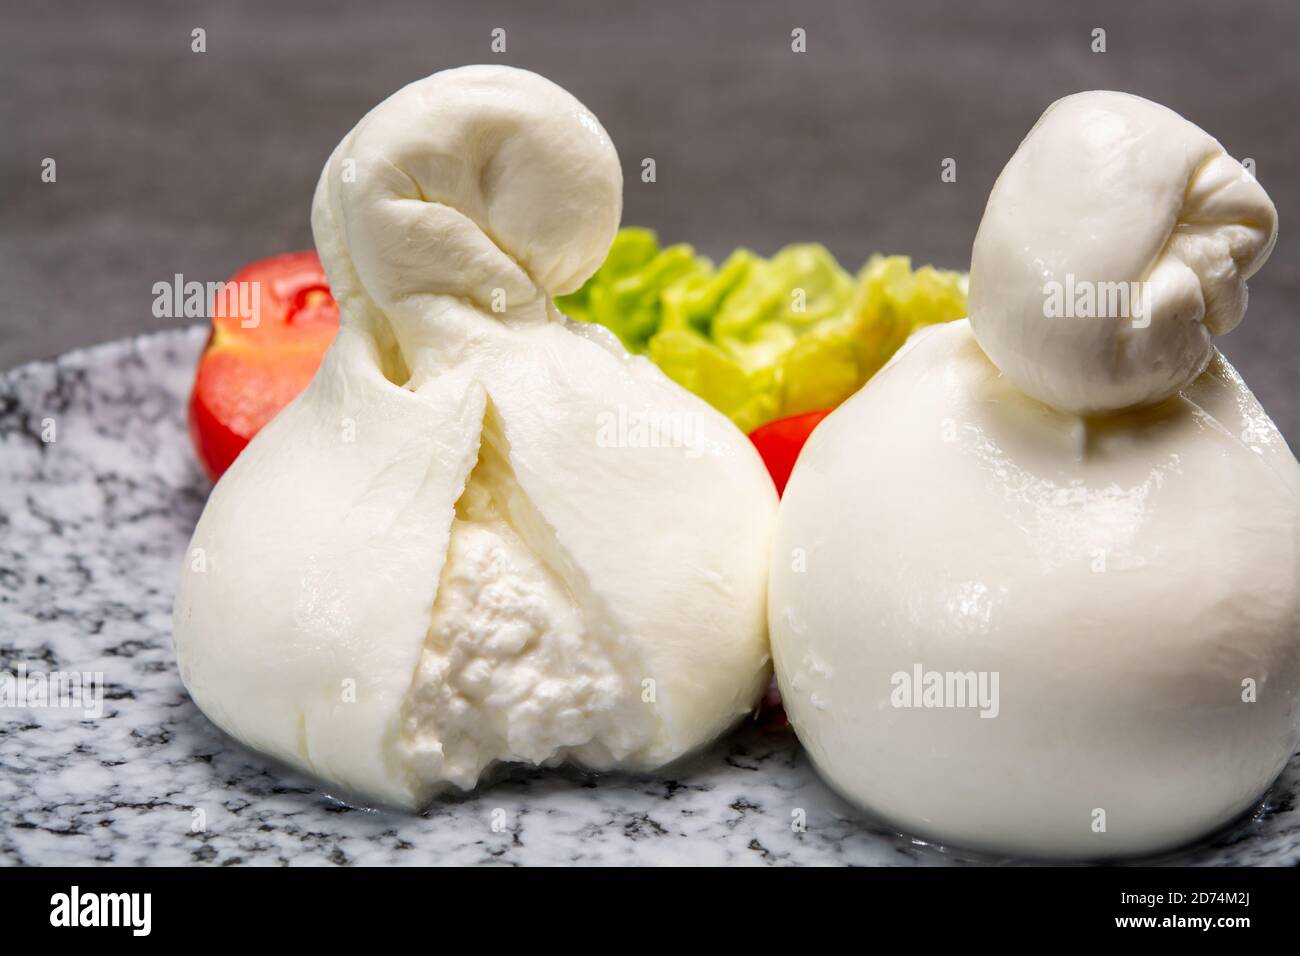 Cheese collection, italian soft white balls of burrata cheese made from  mozzarella with cream inside in region Apulia close up Stock Photo - Alamy